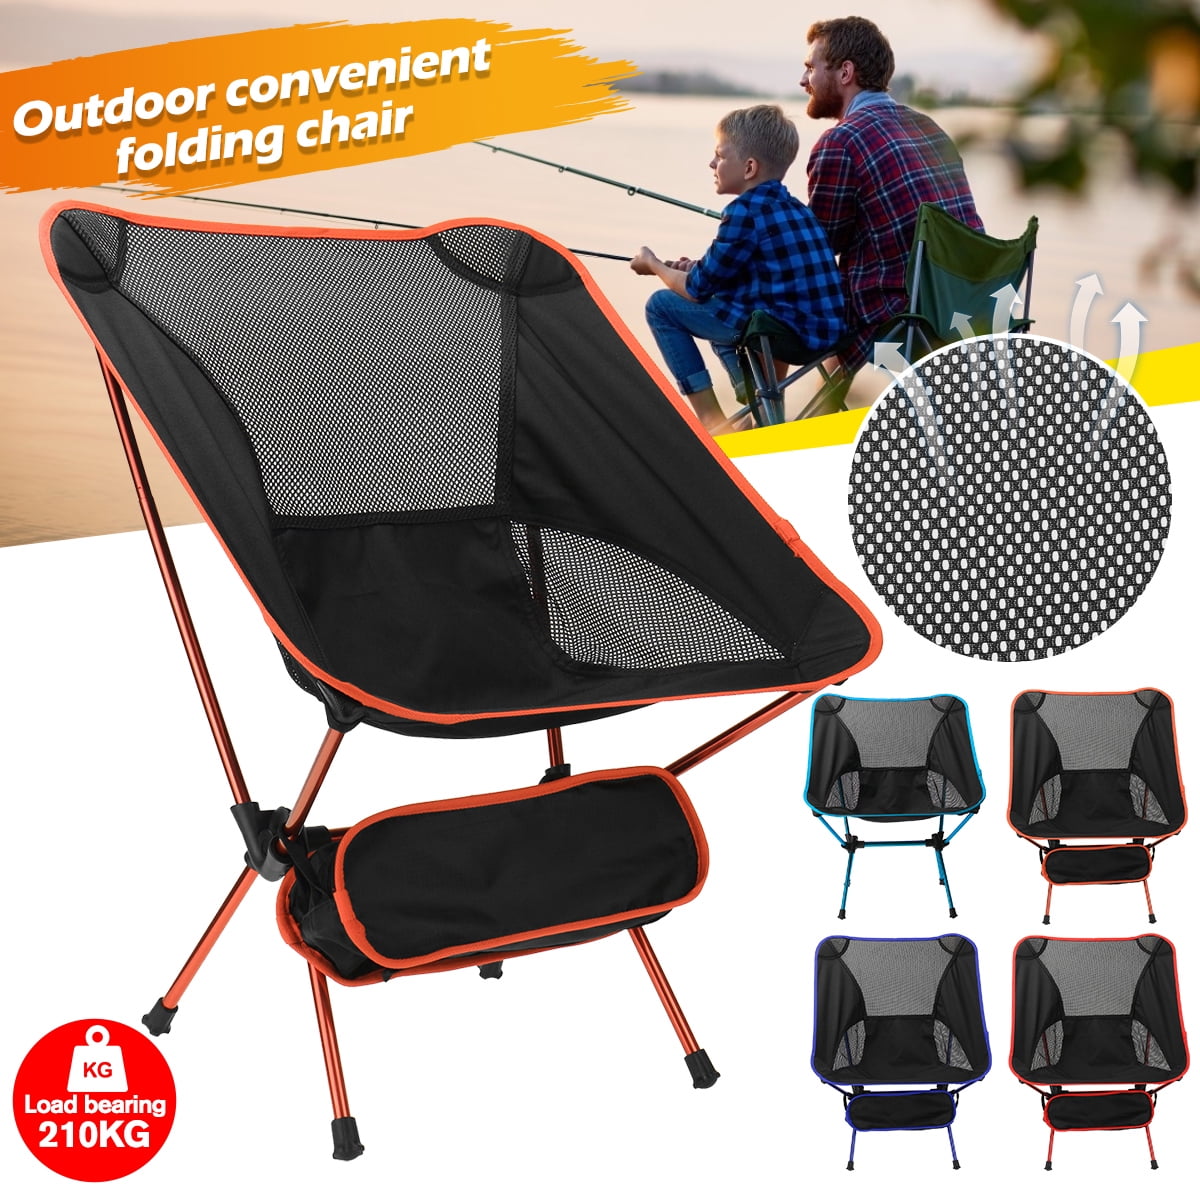 220lbs Capacity with Carry Bag Outdoor Slacker Chair for Backpacking HTEANCO 2pack Folding Camping Stool,Portable Camping & Fishing Chair Beach Picnic BBQ Hiking Travel